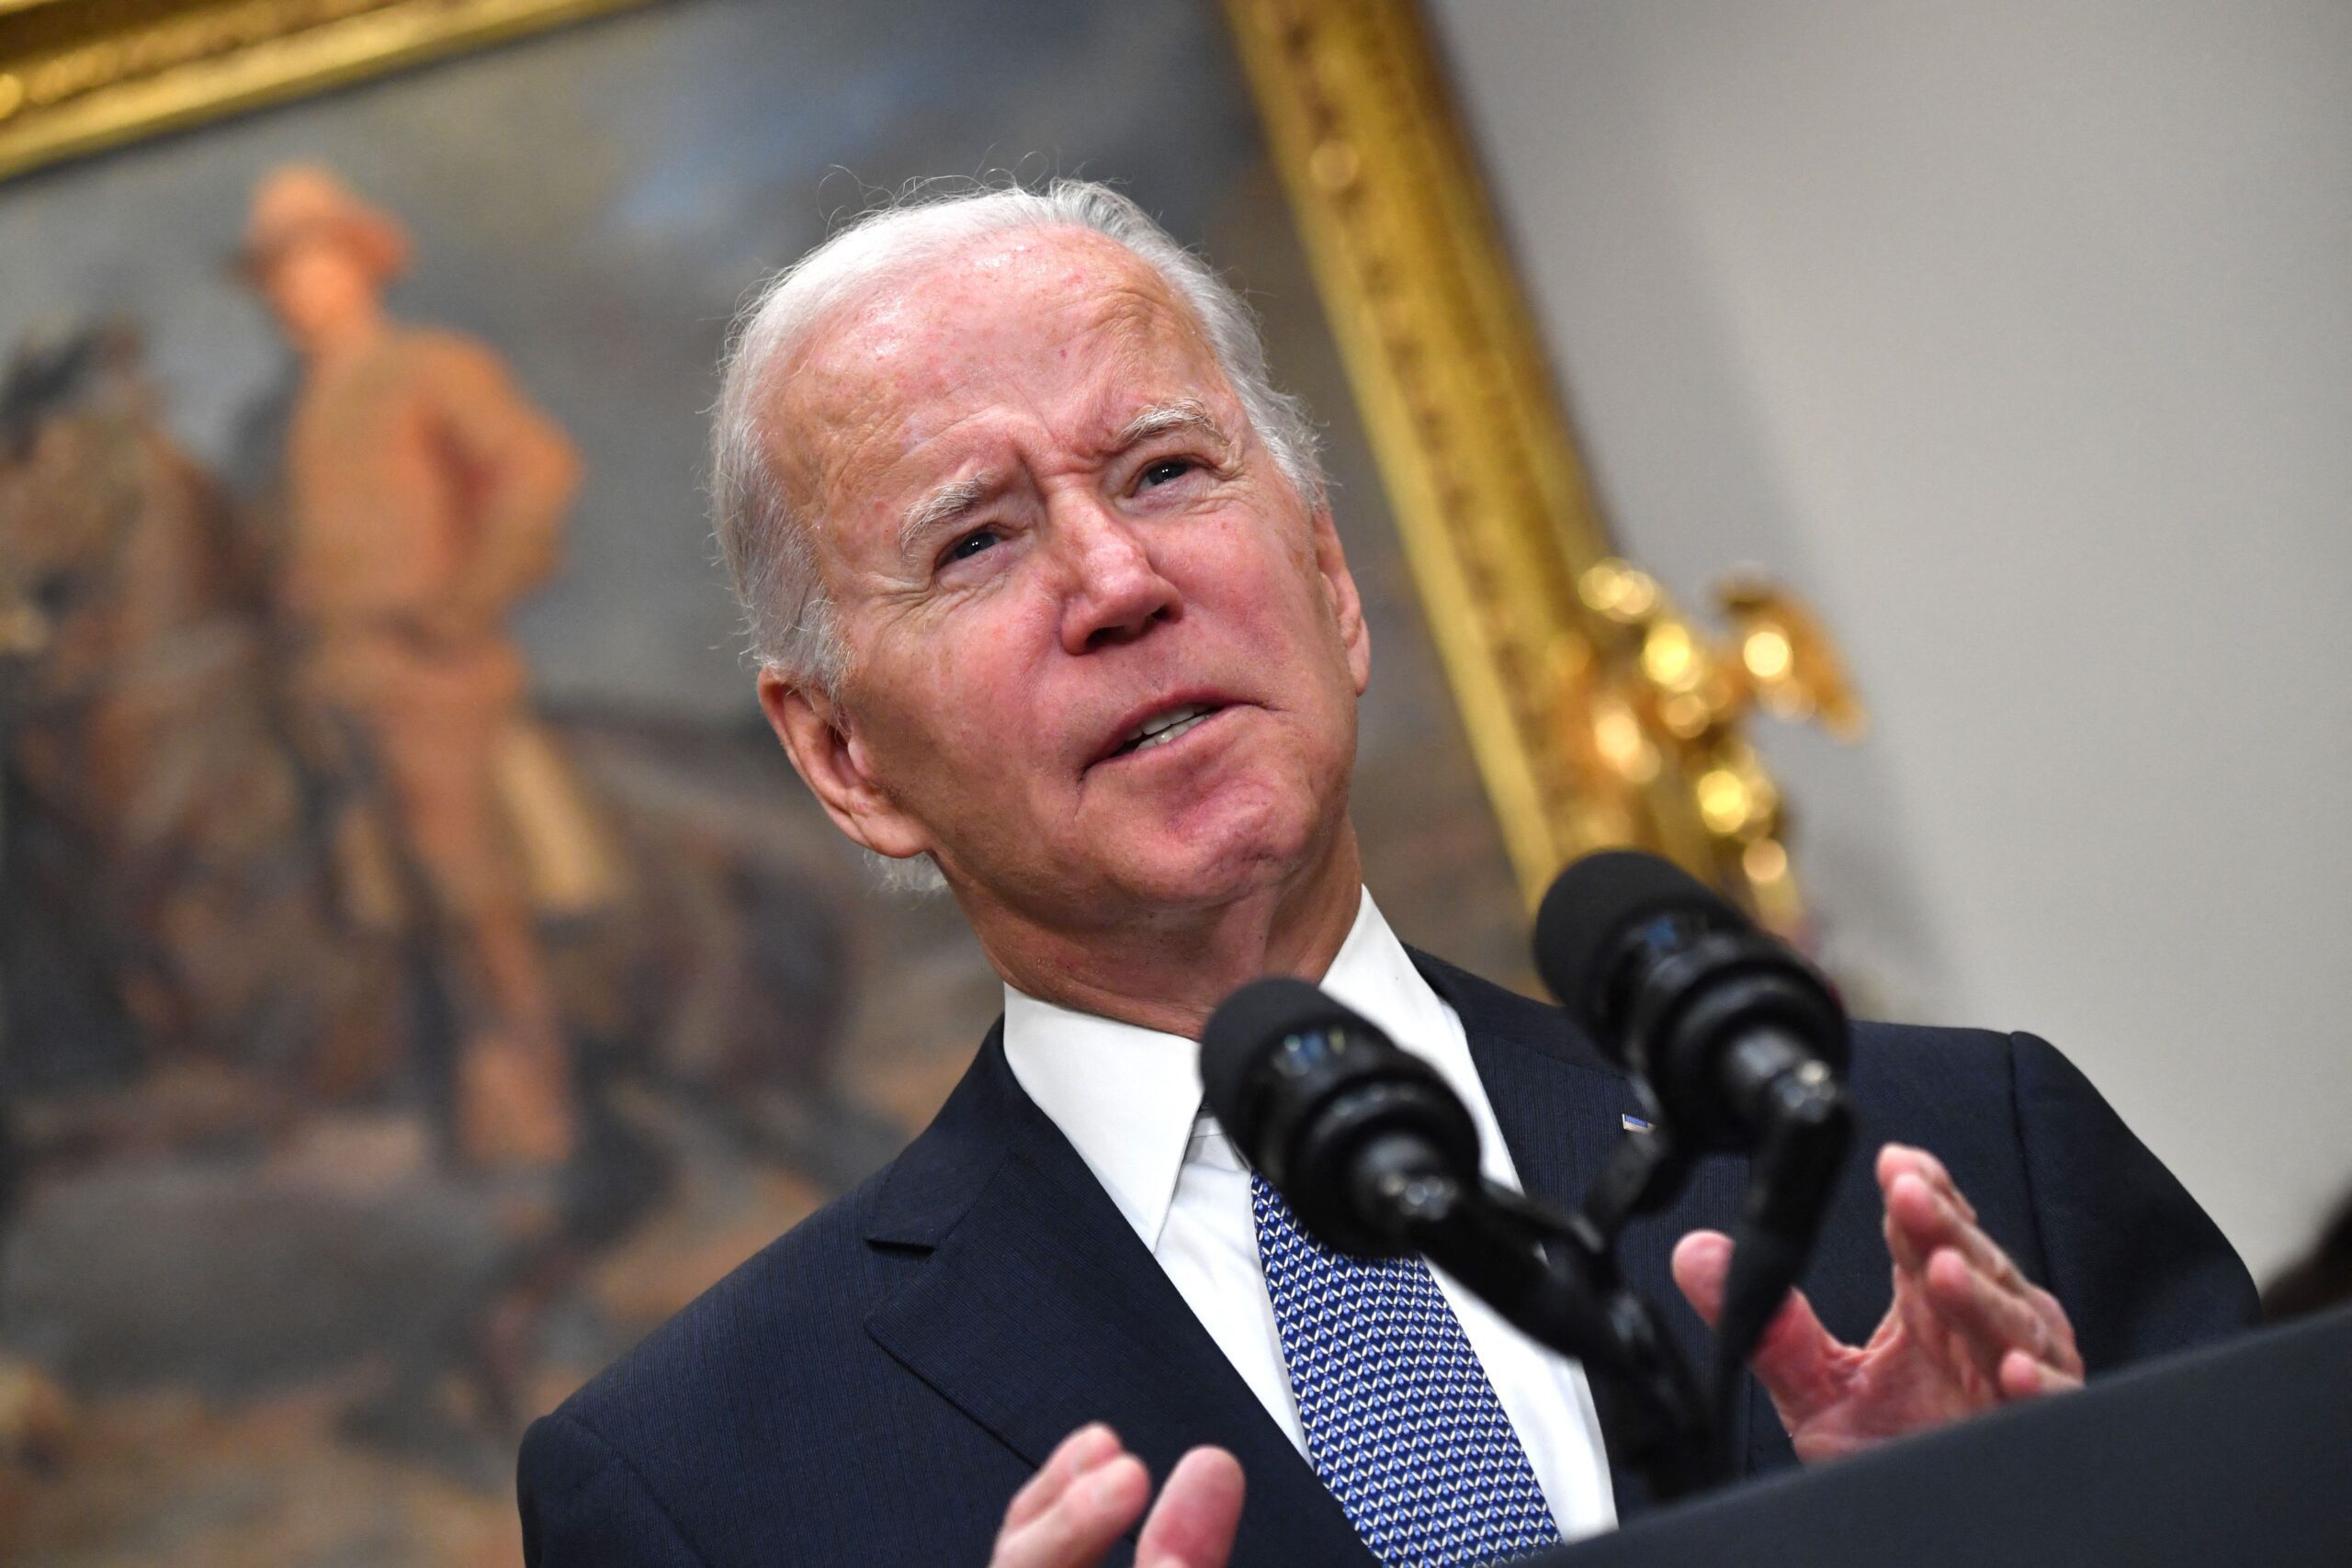 americans-who-have-worse-finances-since-biden-was-elected-overwhelmingly-blame-democrats